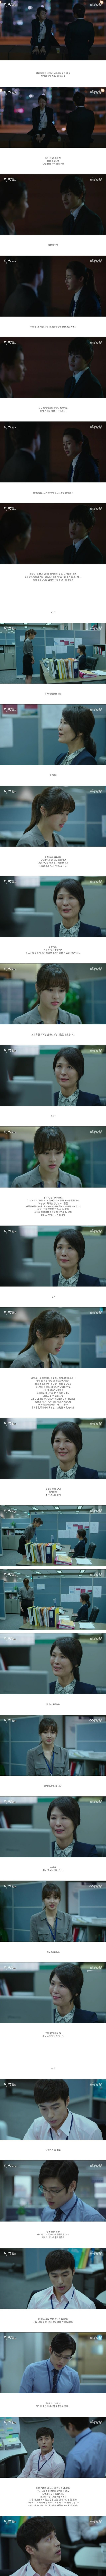 episodes 7 and 8 captures for the Korean drama 'Incomplete Life'